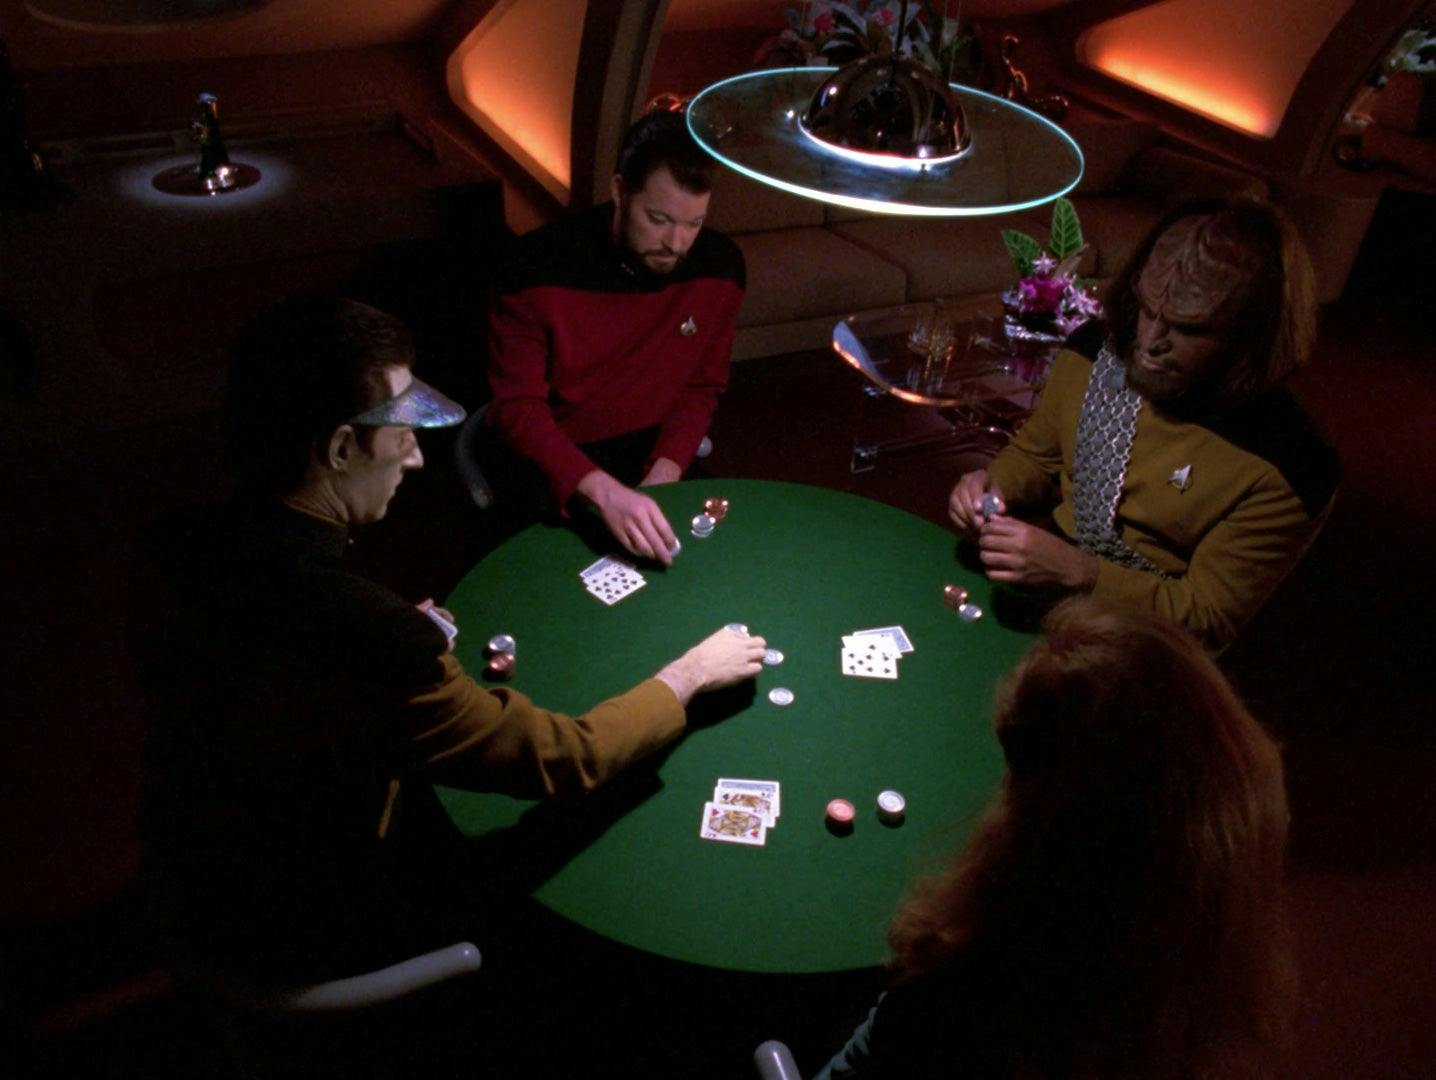 Data, Riker, Worf, and Crusher play poker in crew quarters in 'Cause and Effect'